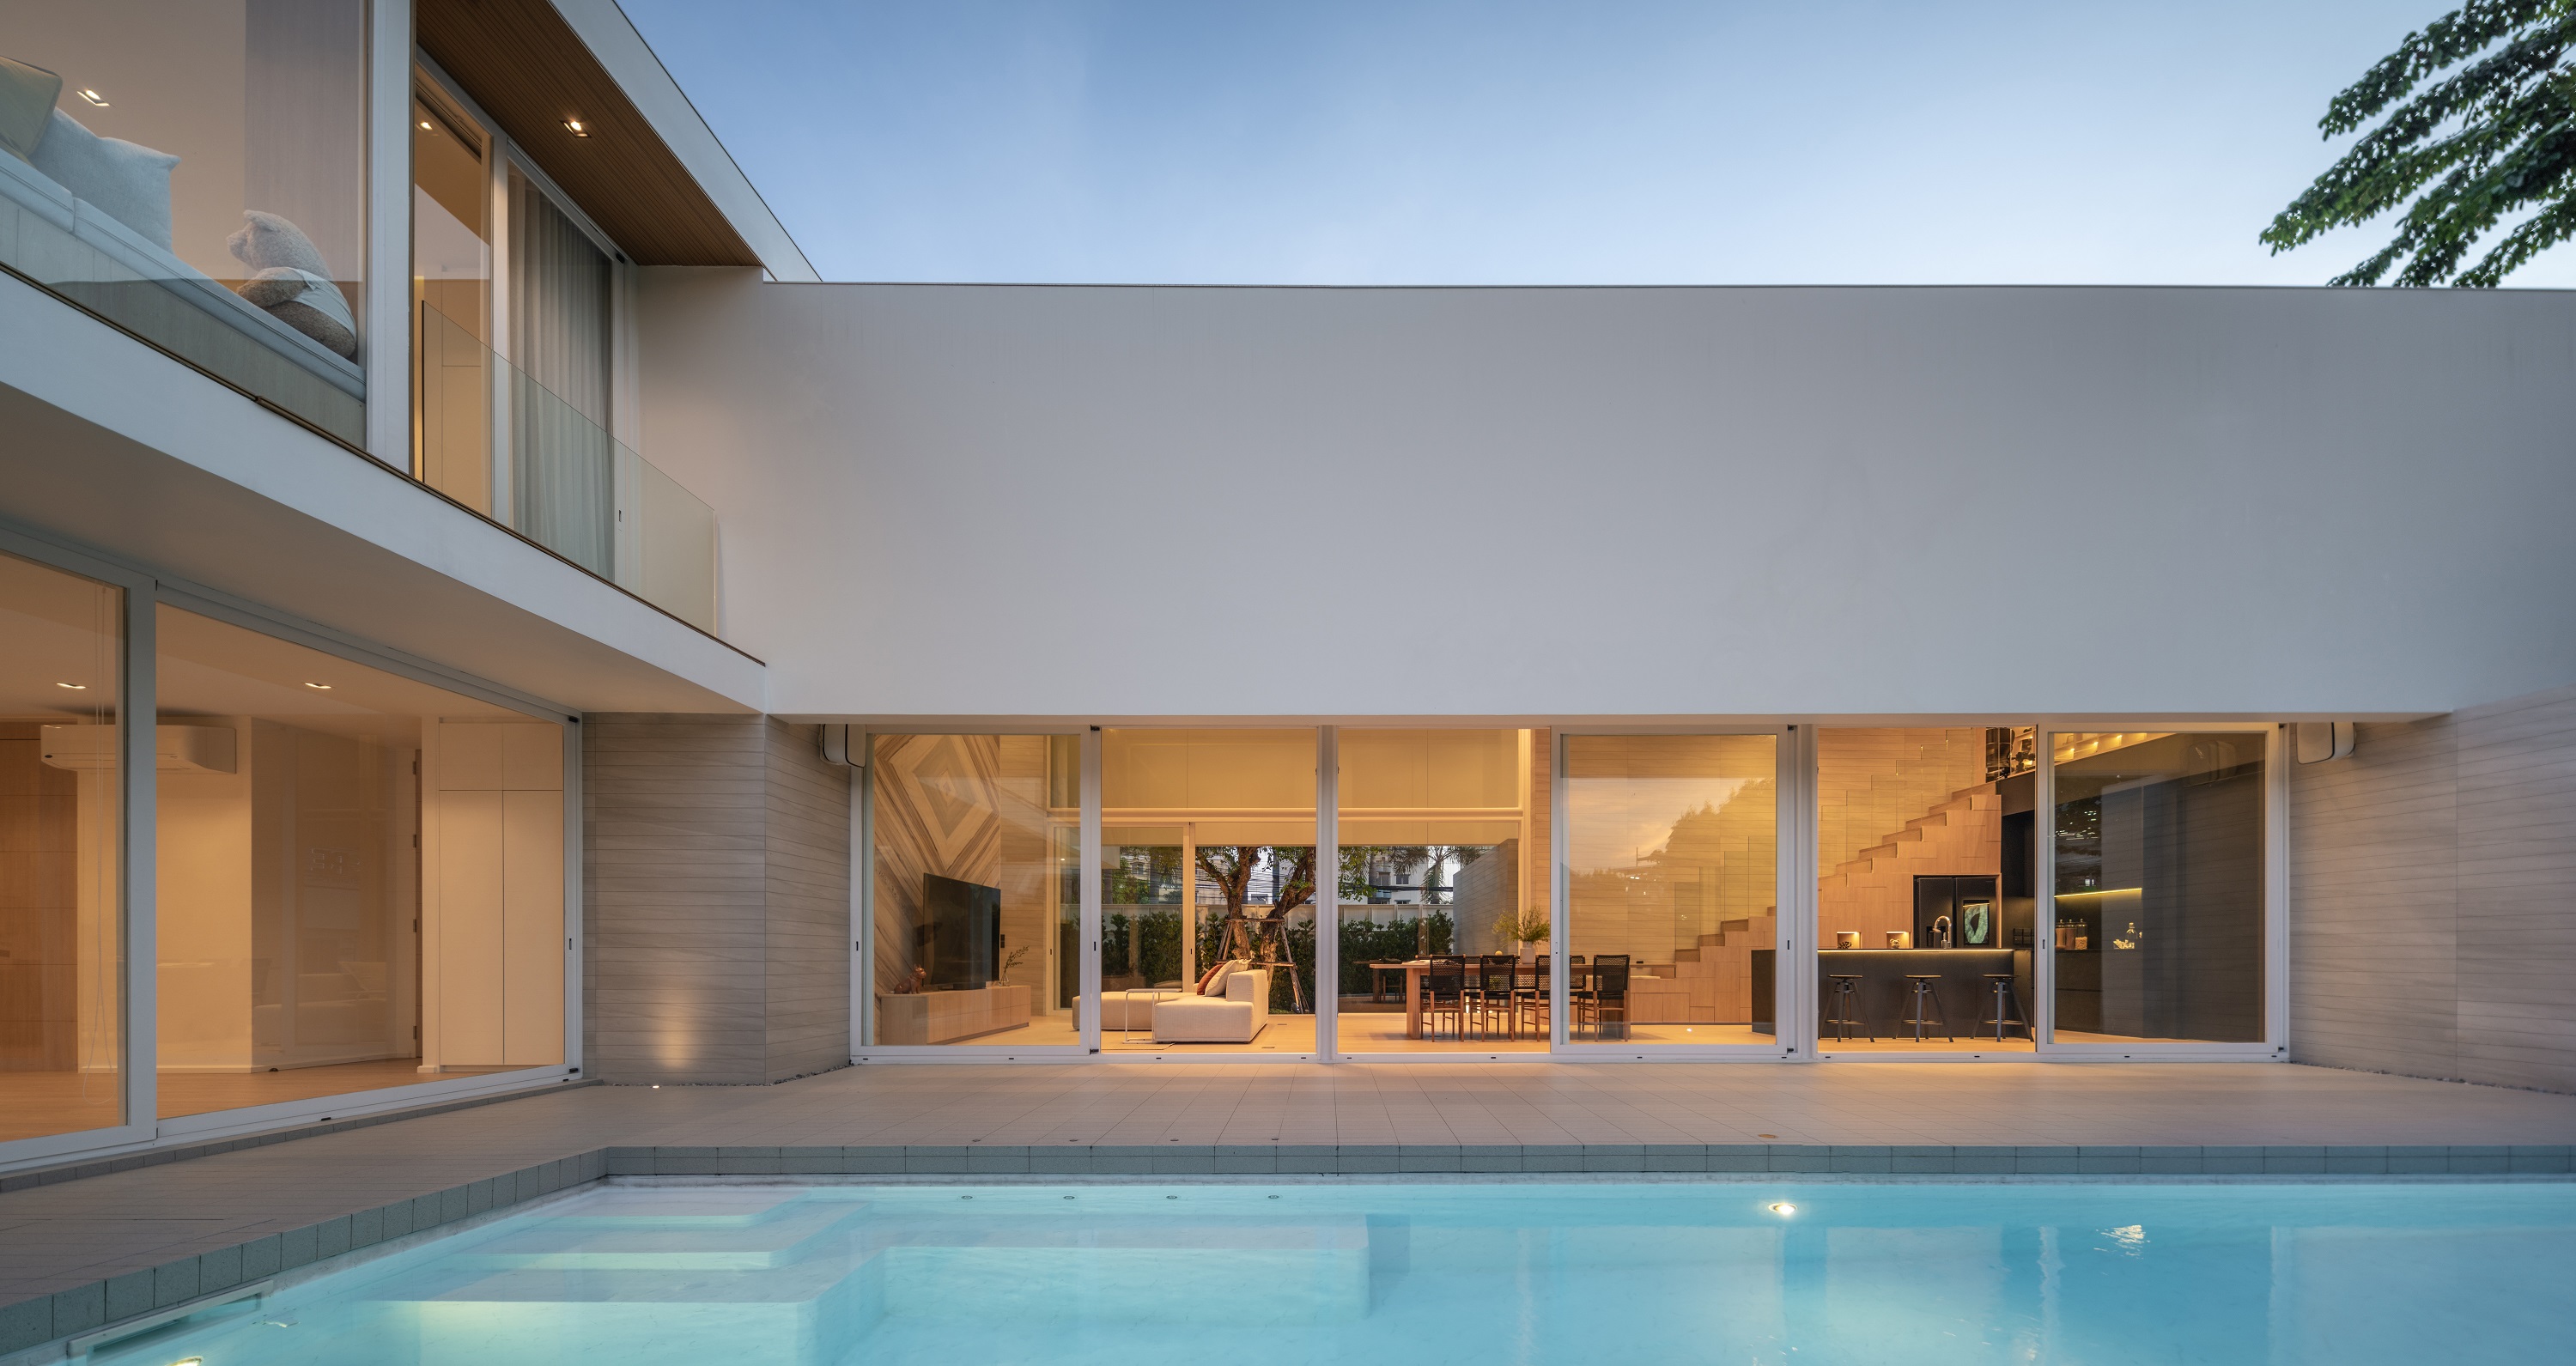 View from the pool of TJ House, Photo by SkyGround architectural film & photography